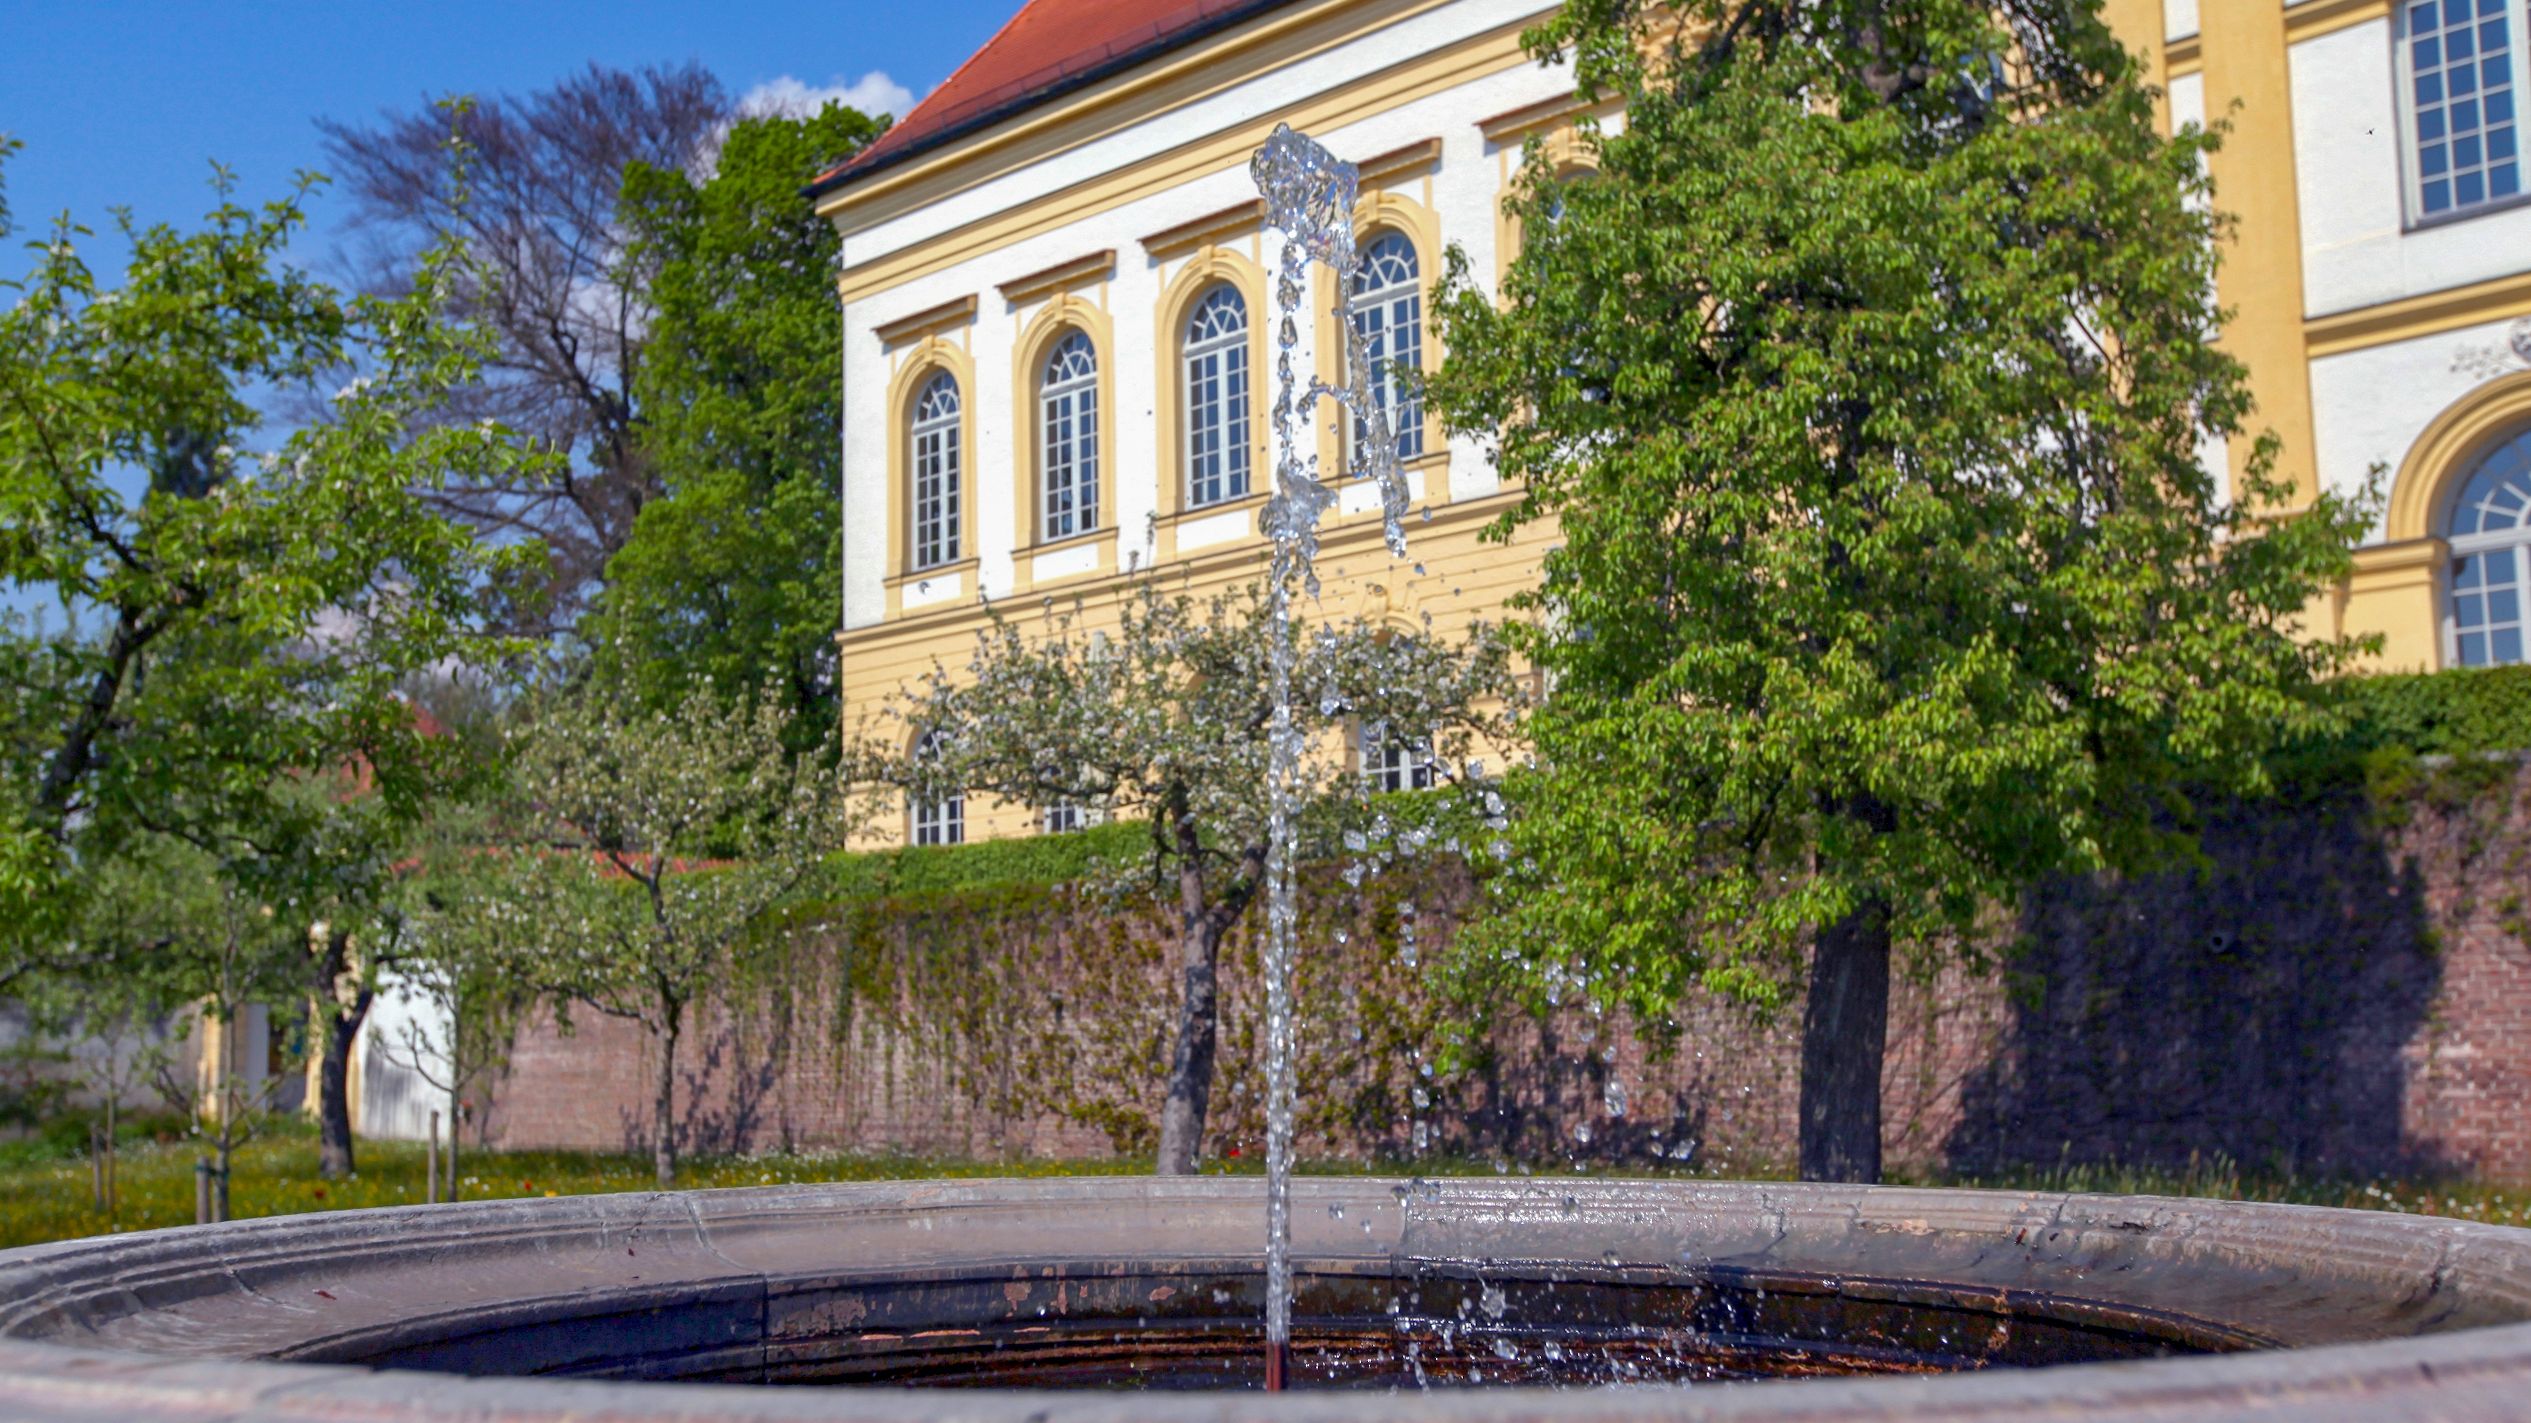 Photo of Dachau Palace garden with fountain in the foreground and Dachau Palace in the background. Photo: City of Dachau